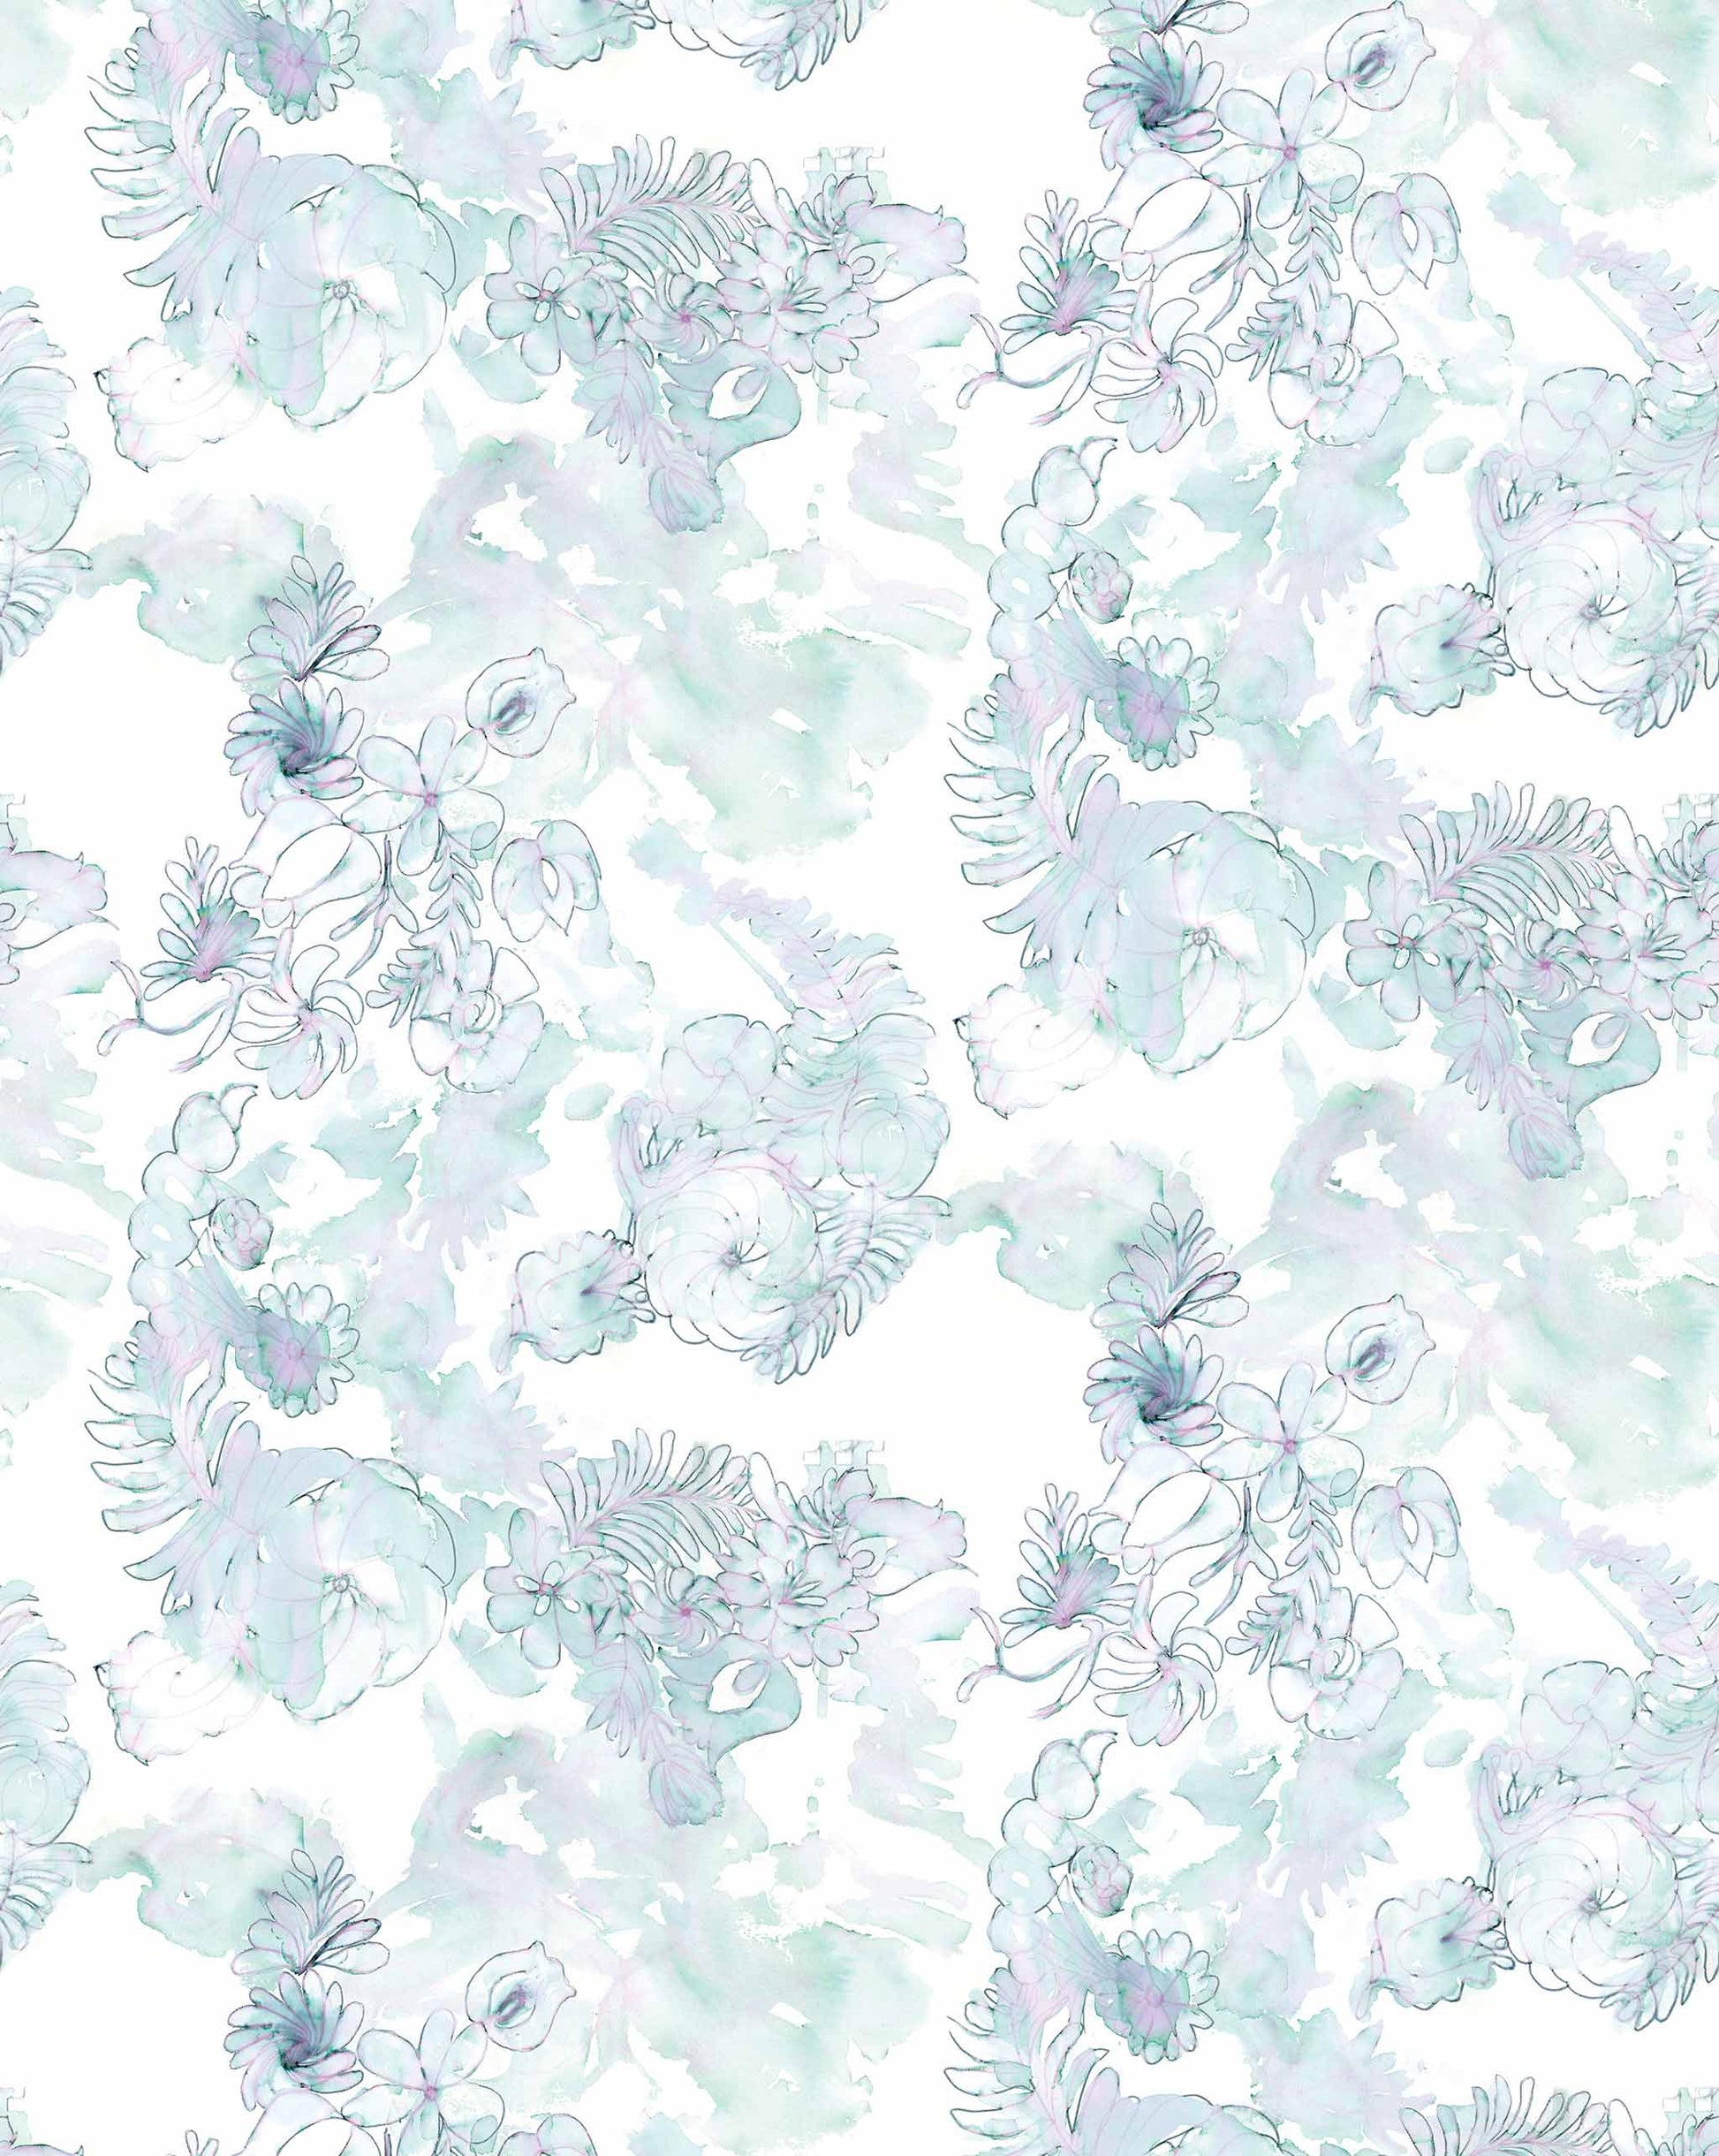 Seamless Belize Blooms Wallpaper Mural with delicate blue and green watercolor flowers on a faded watercolor background.